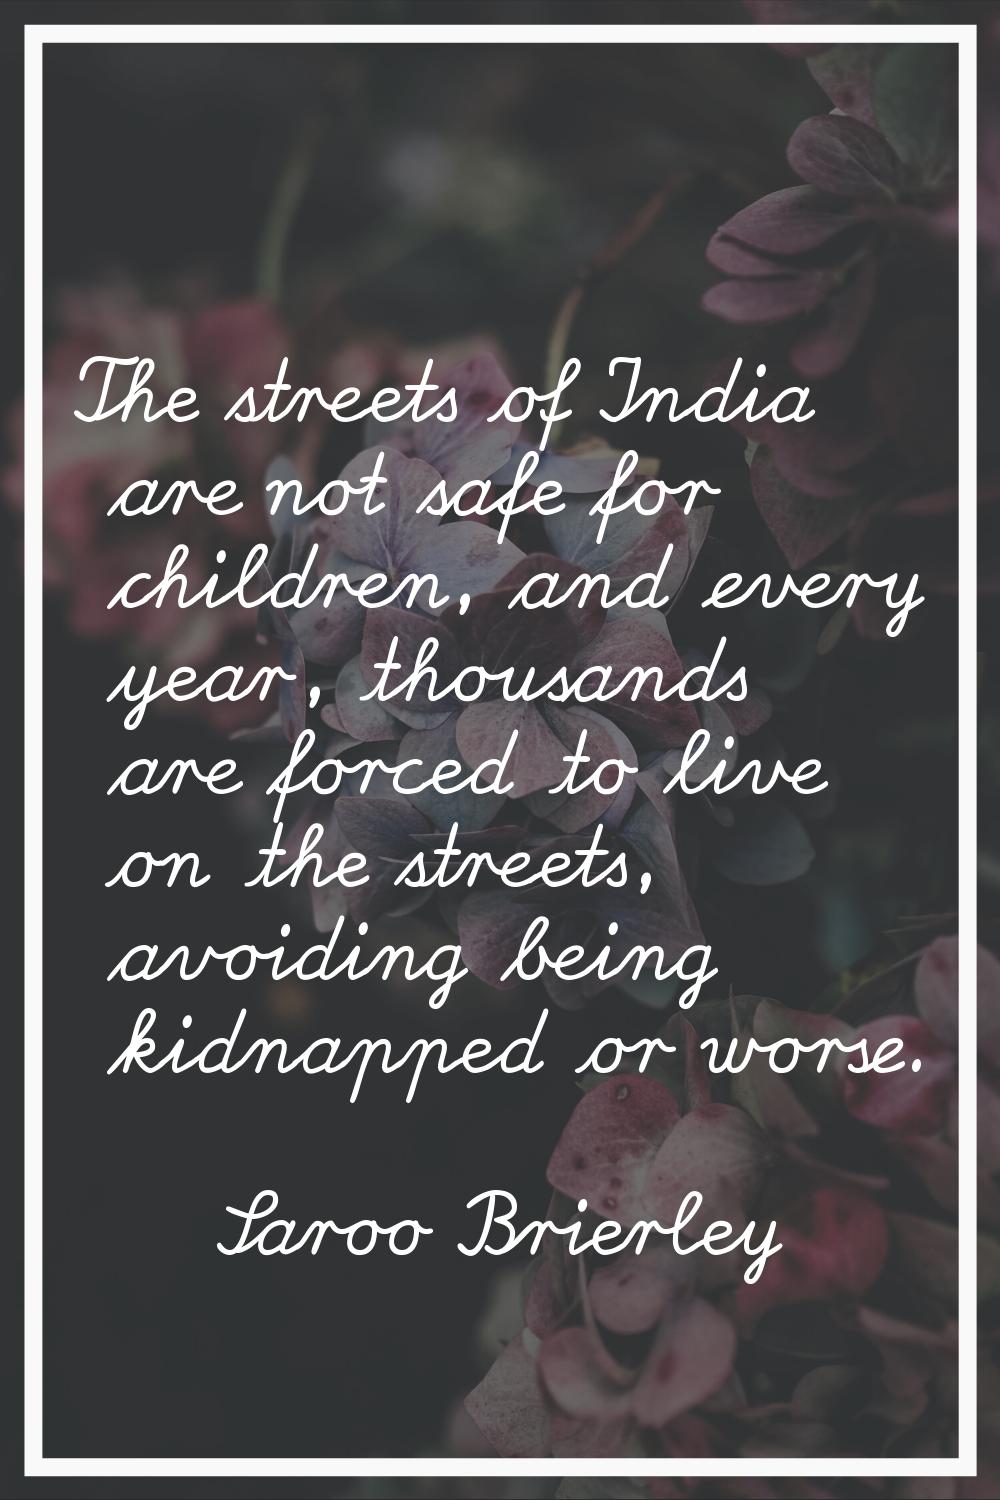 The streets of India are not safe for children, and every year, thousands are forced to live on the